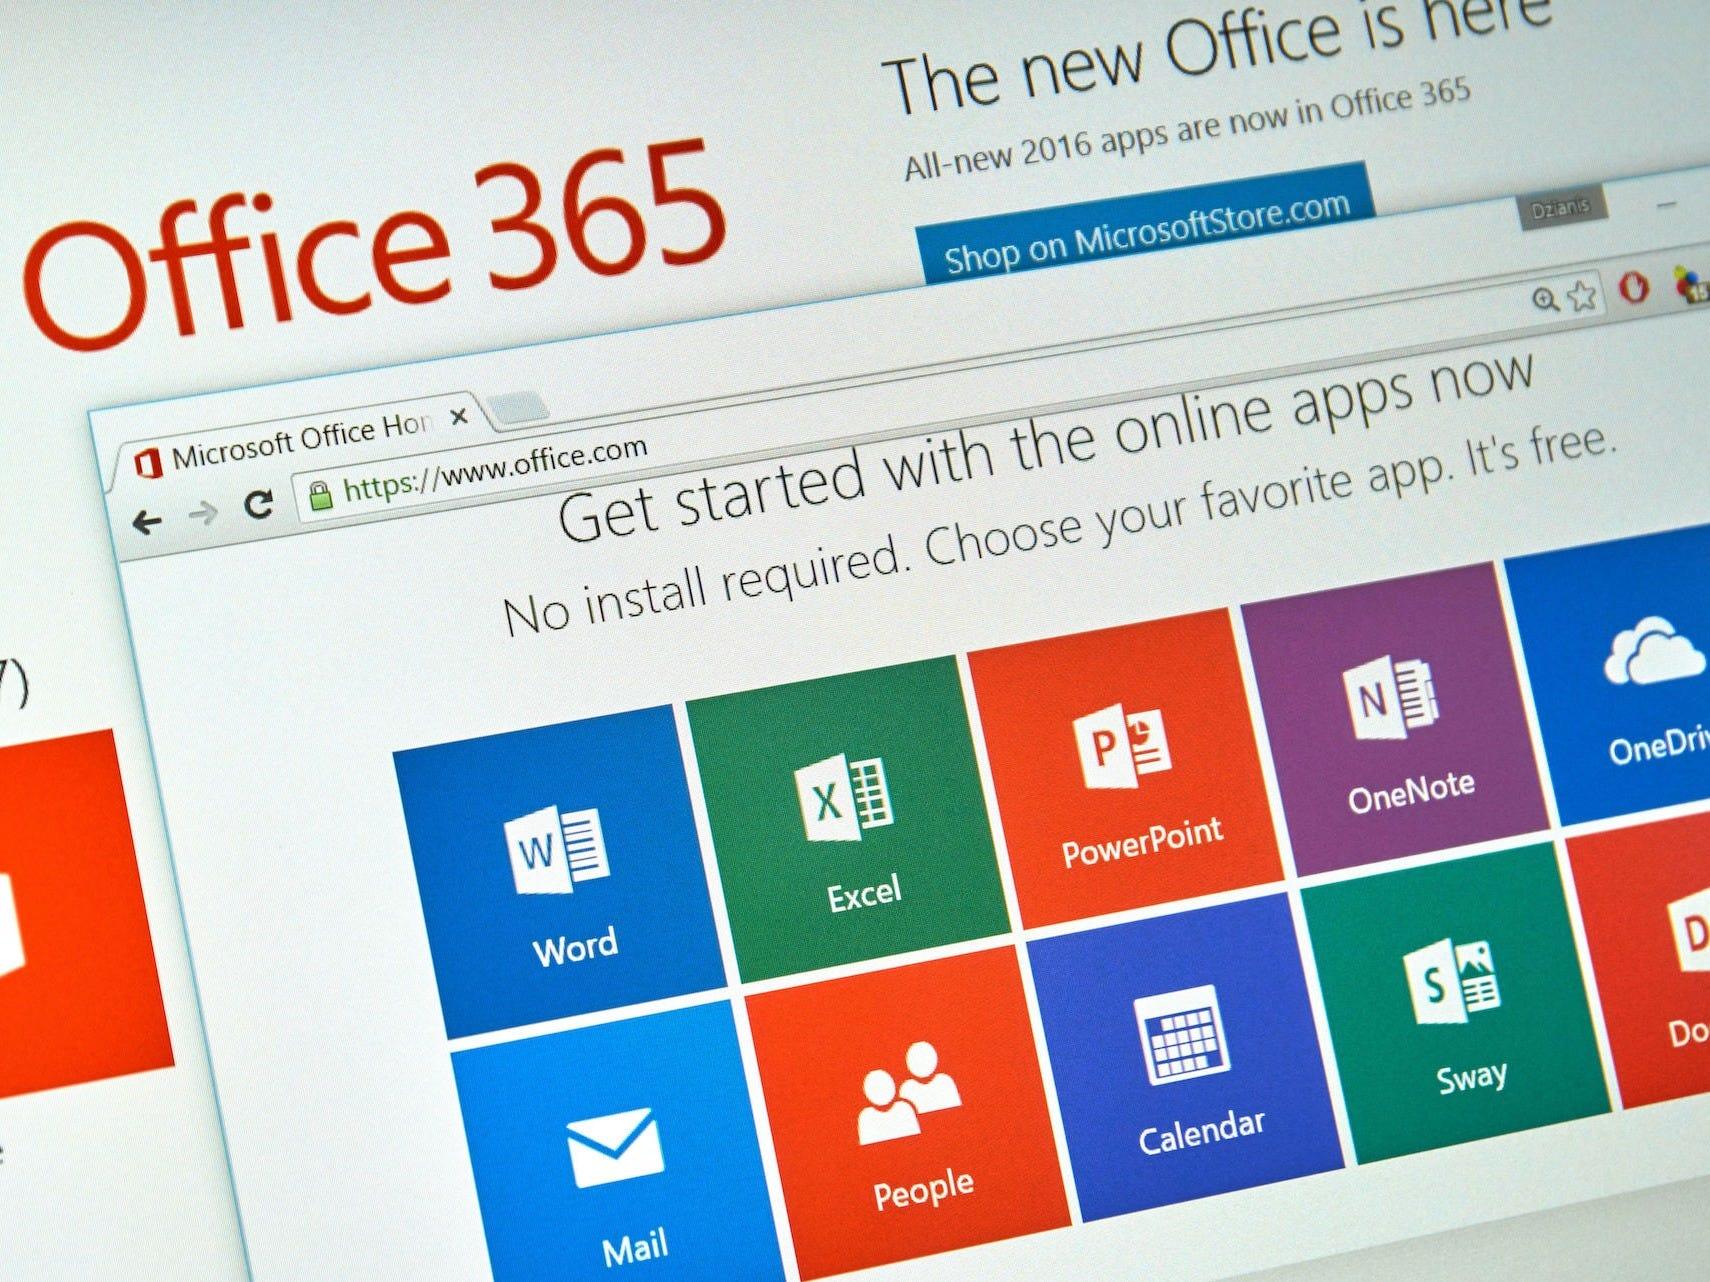 download office 365 mac on a pc for later